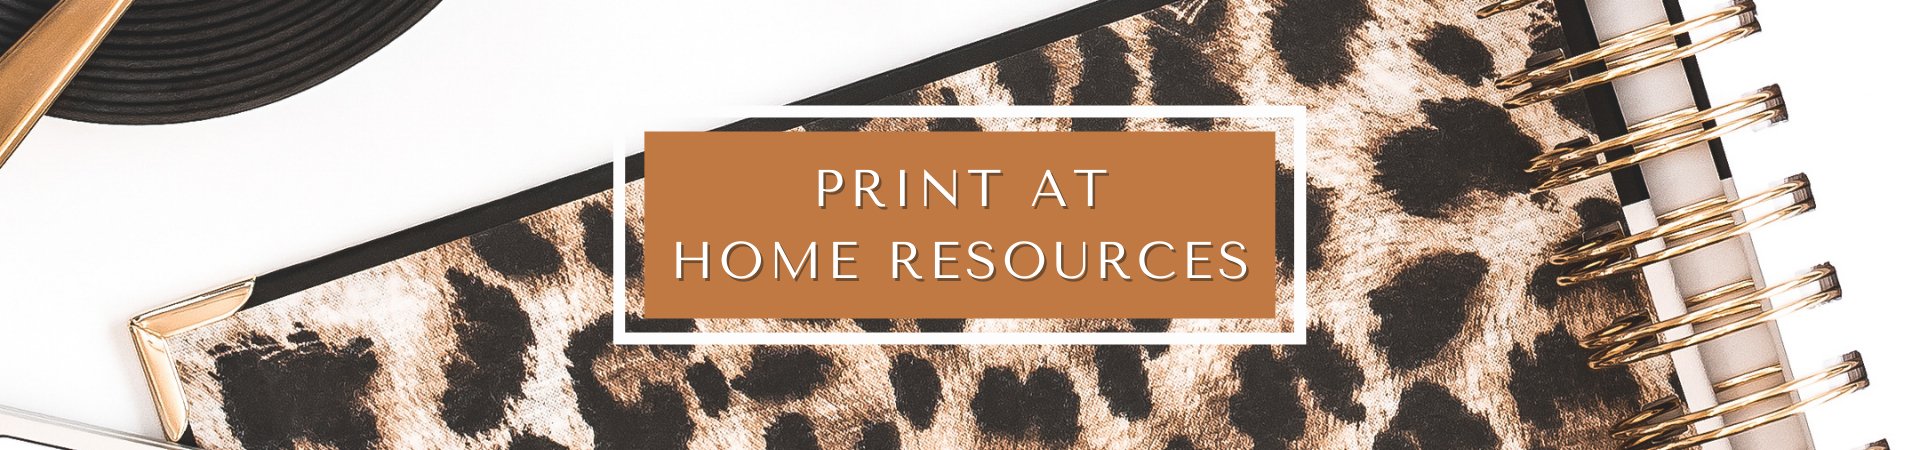 Resources for Print at Home - Livestock & Co.